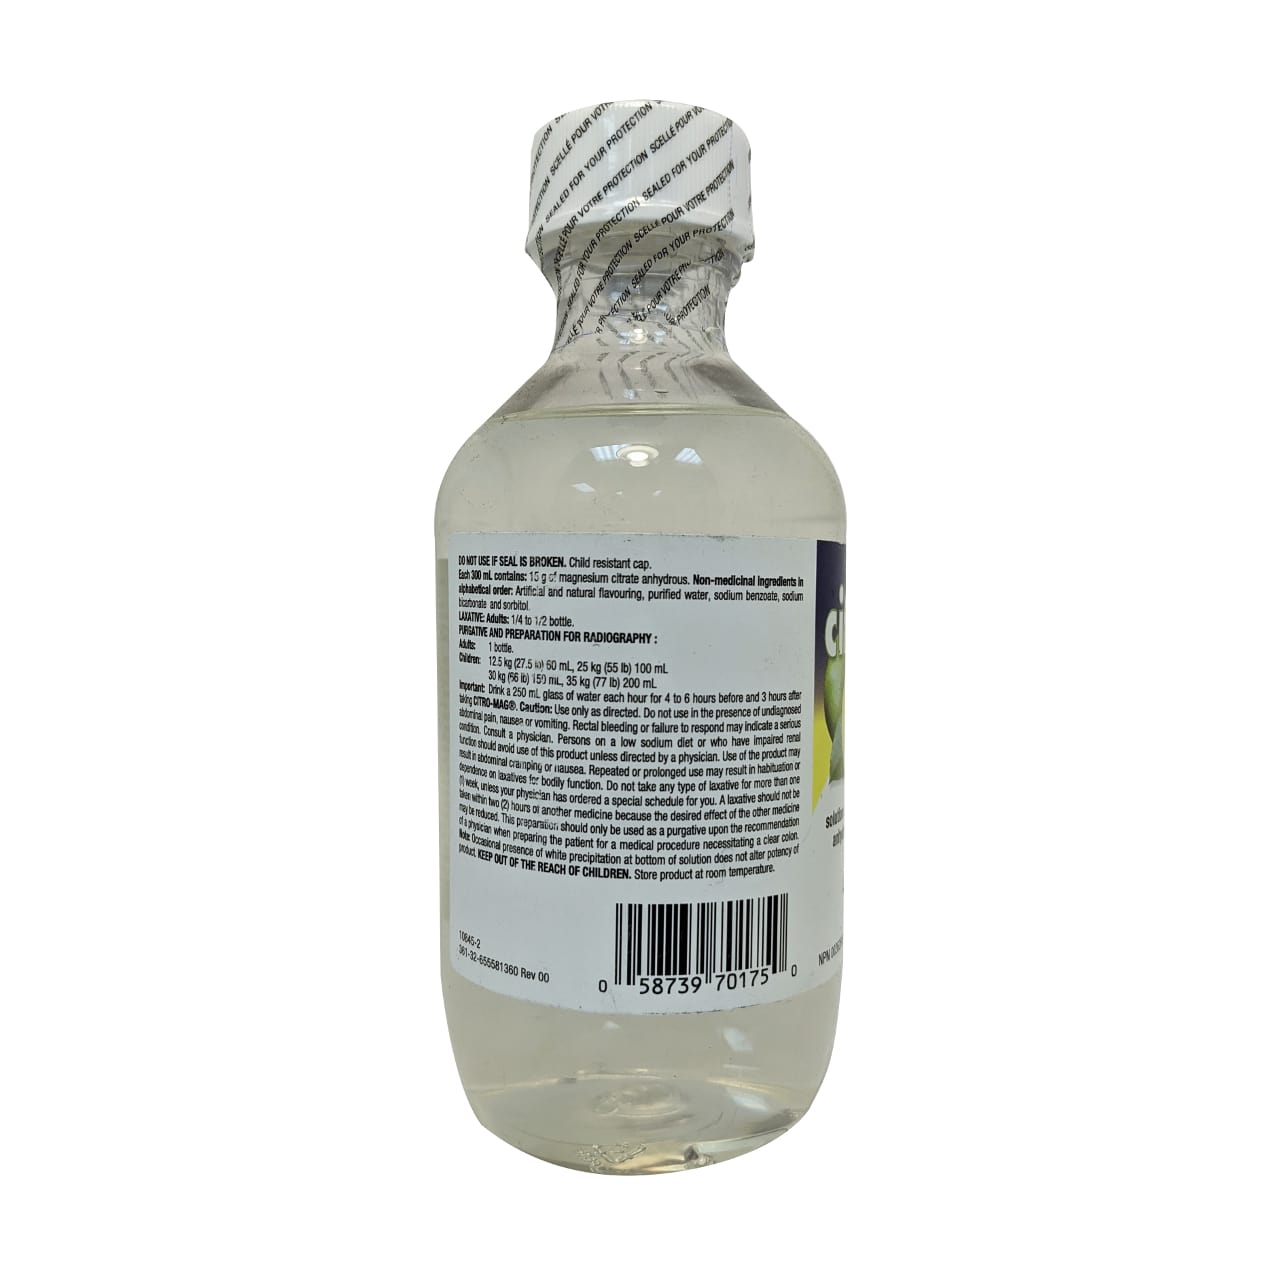 Dose, ingredients, and caution for Rougier Pharma Citro-Mag Laxative (300mL) Lemon Lime in English